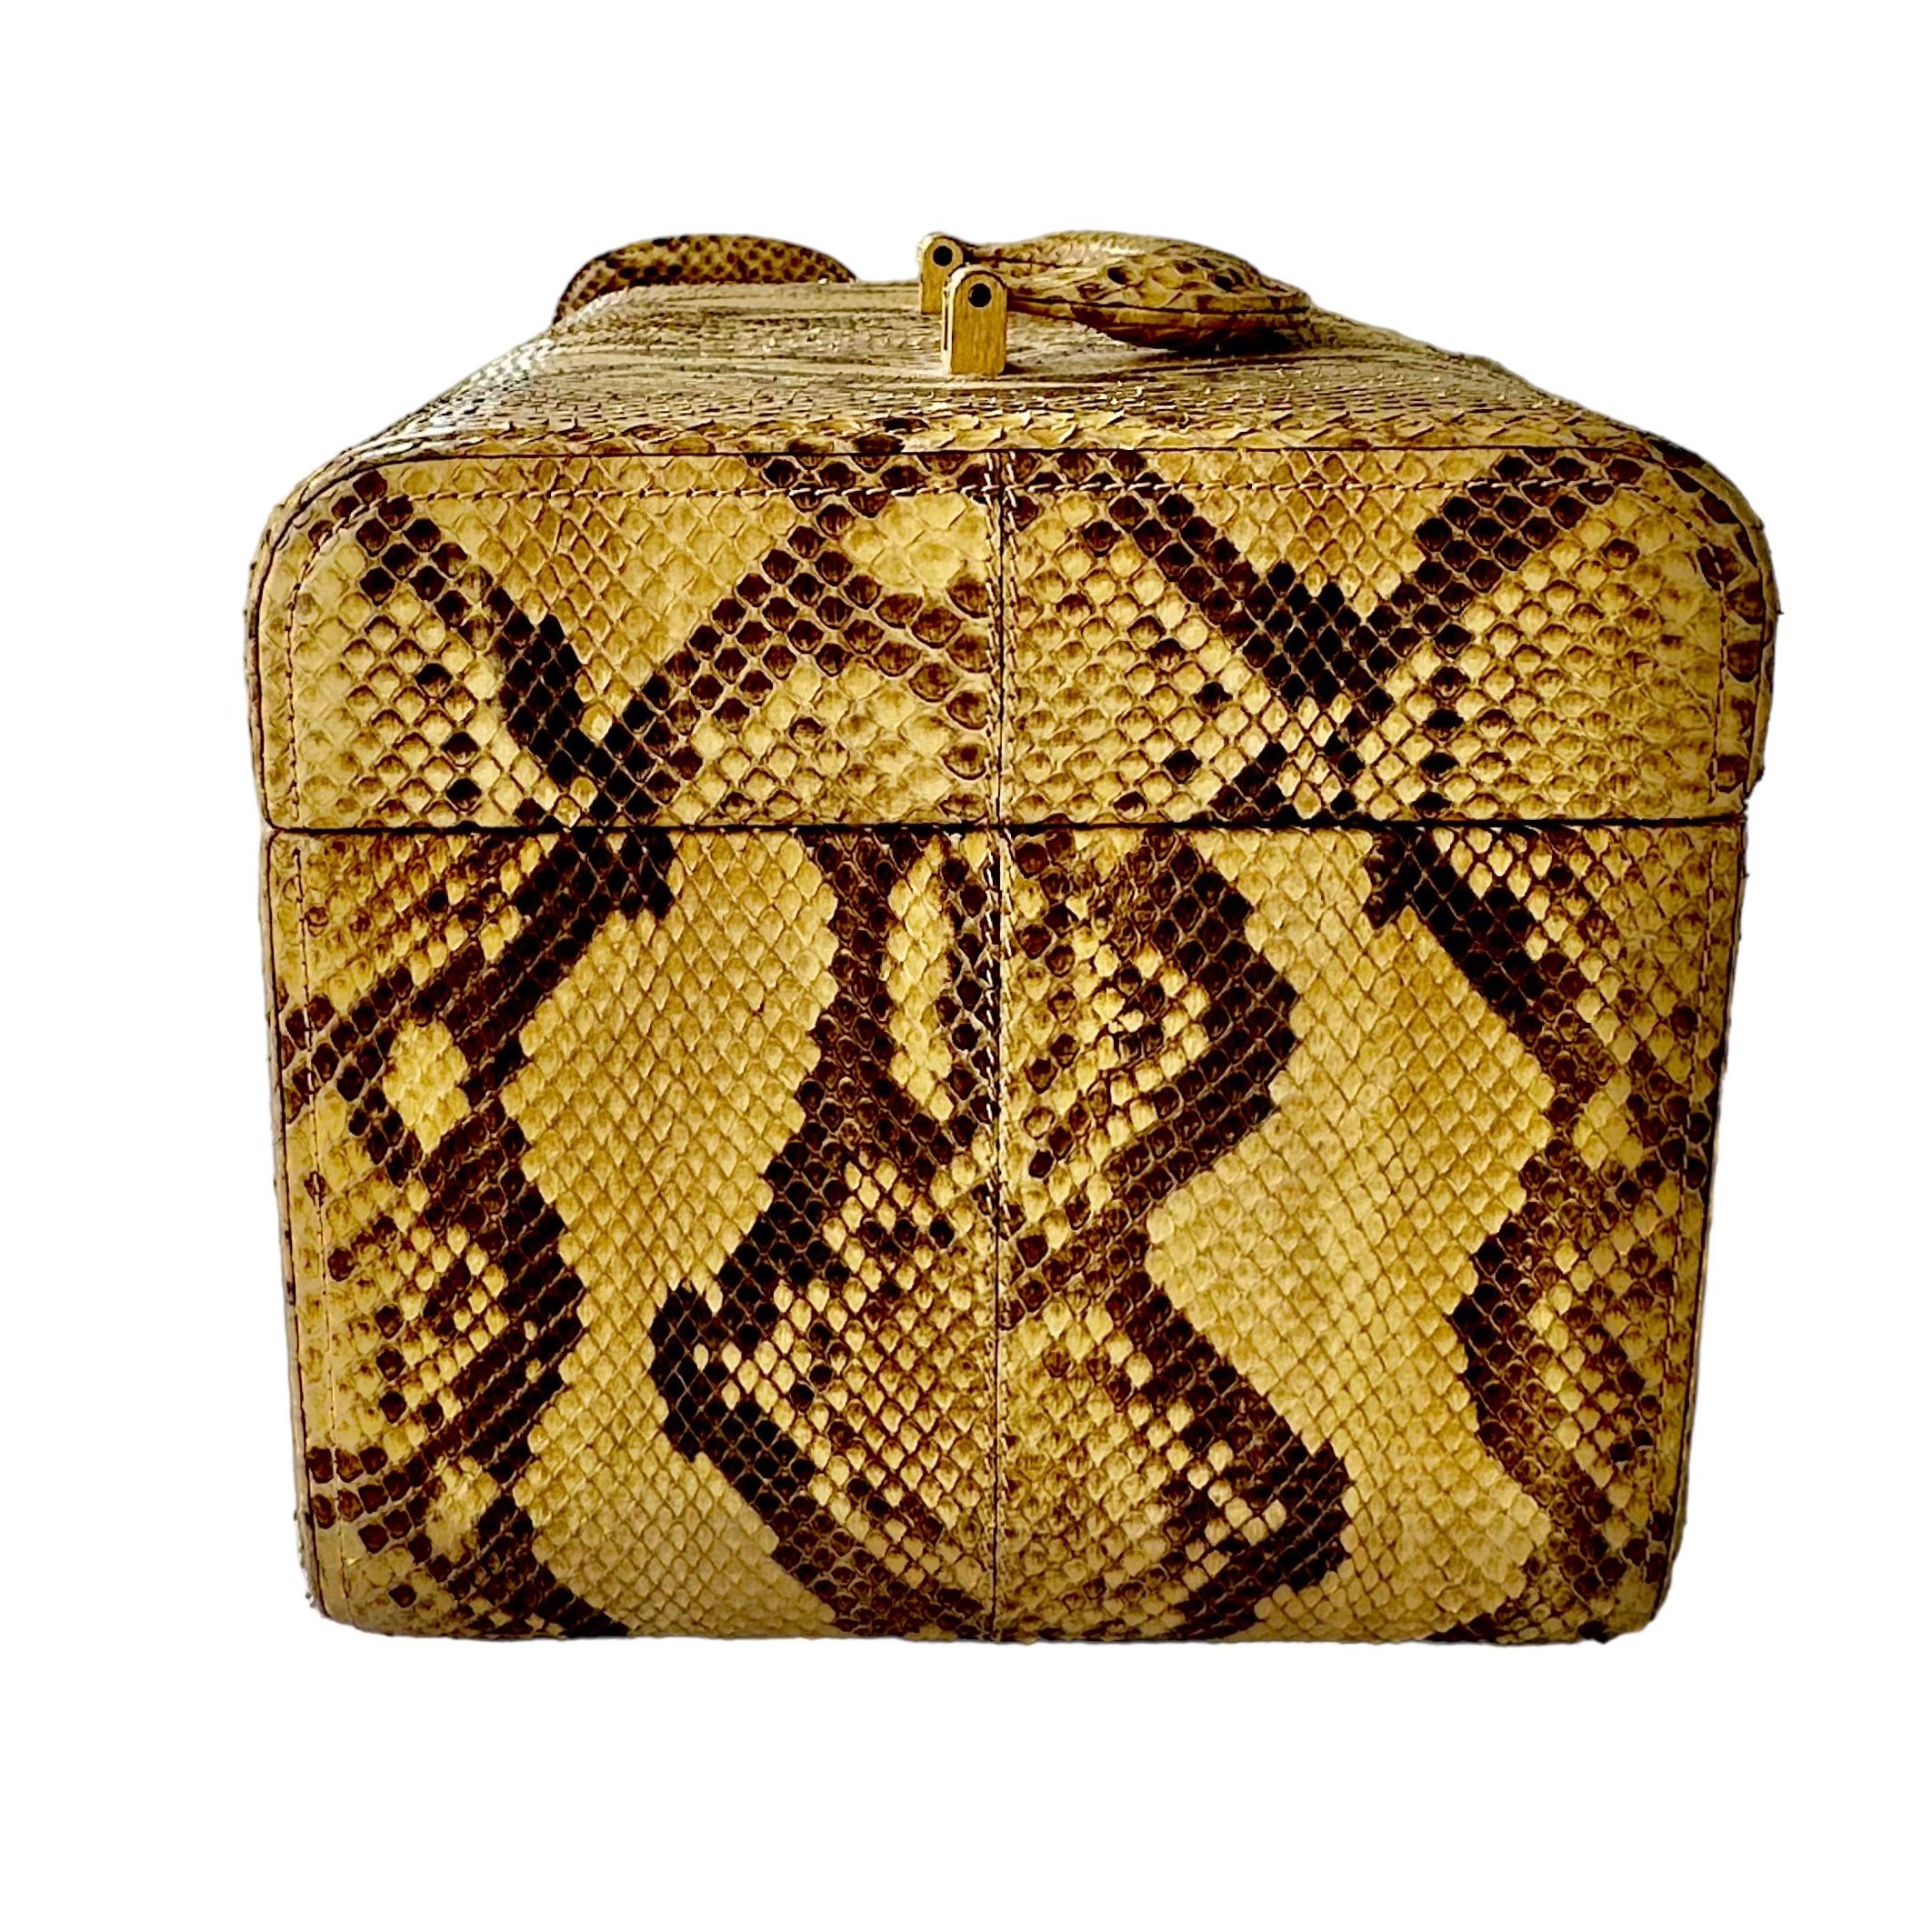 Pineider Reptile Skin Covered Travel Beauty Case and Companion Jewelry Case In Good Condition For Sale In Palm Beach, FL